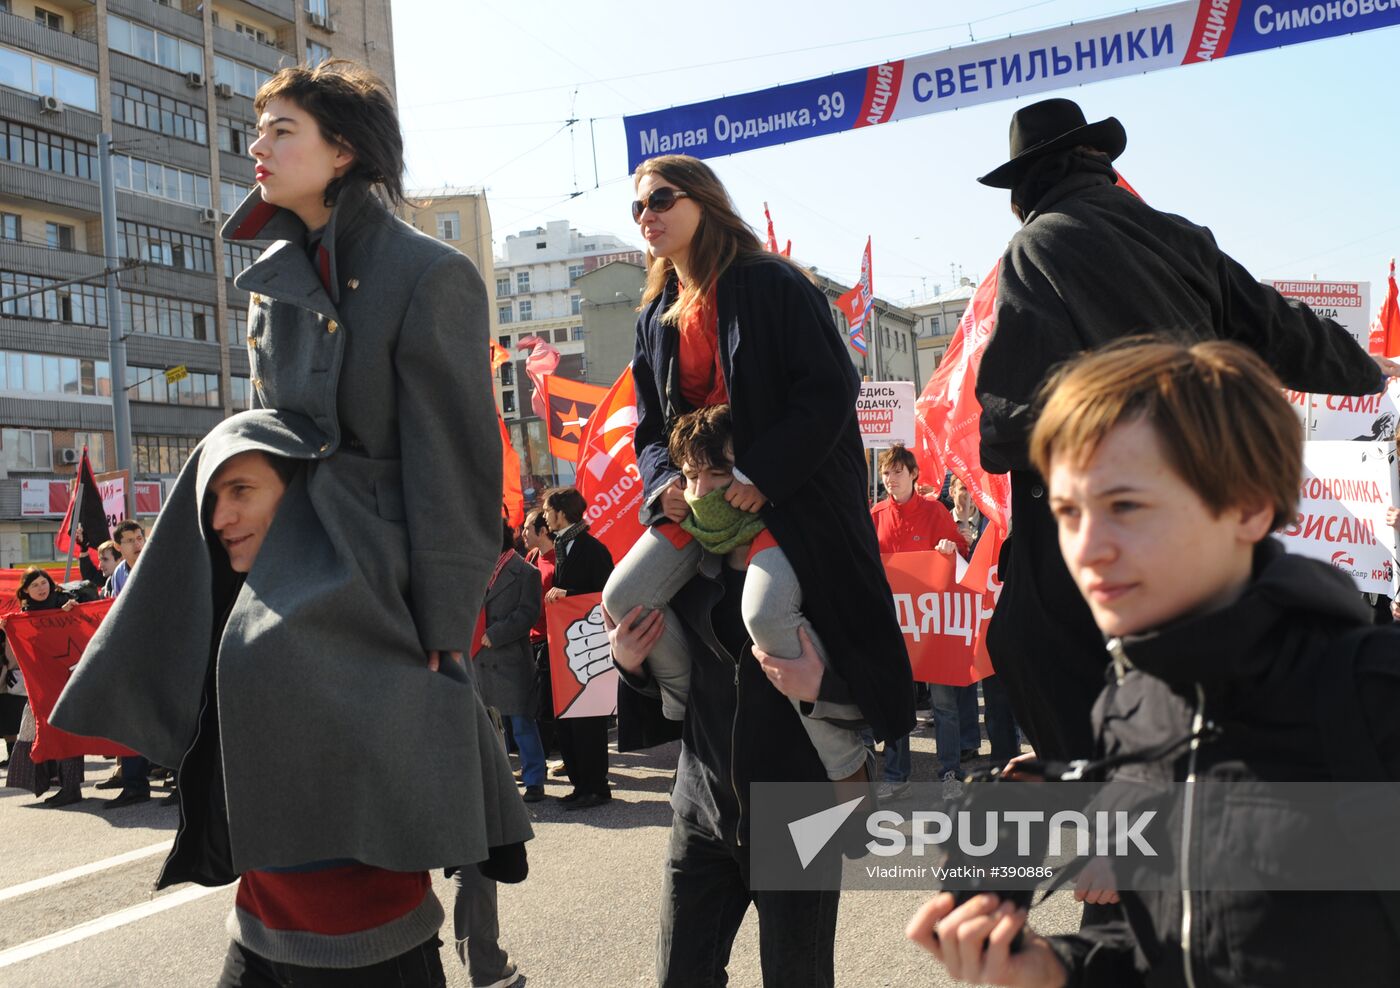 Left-wing opposition supporters participating in Labor Day march